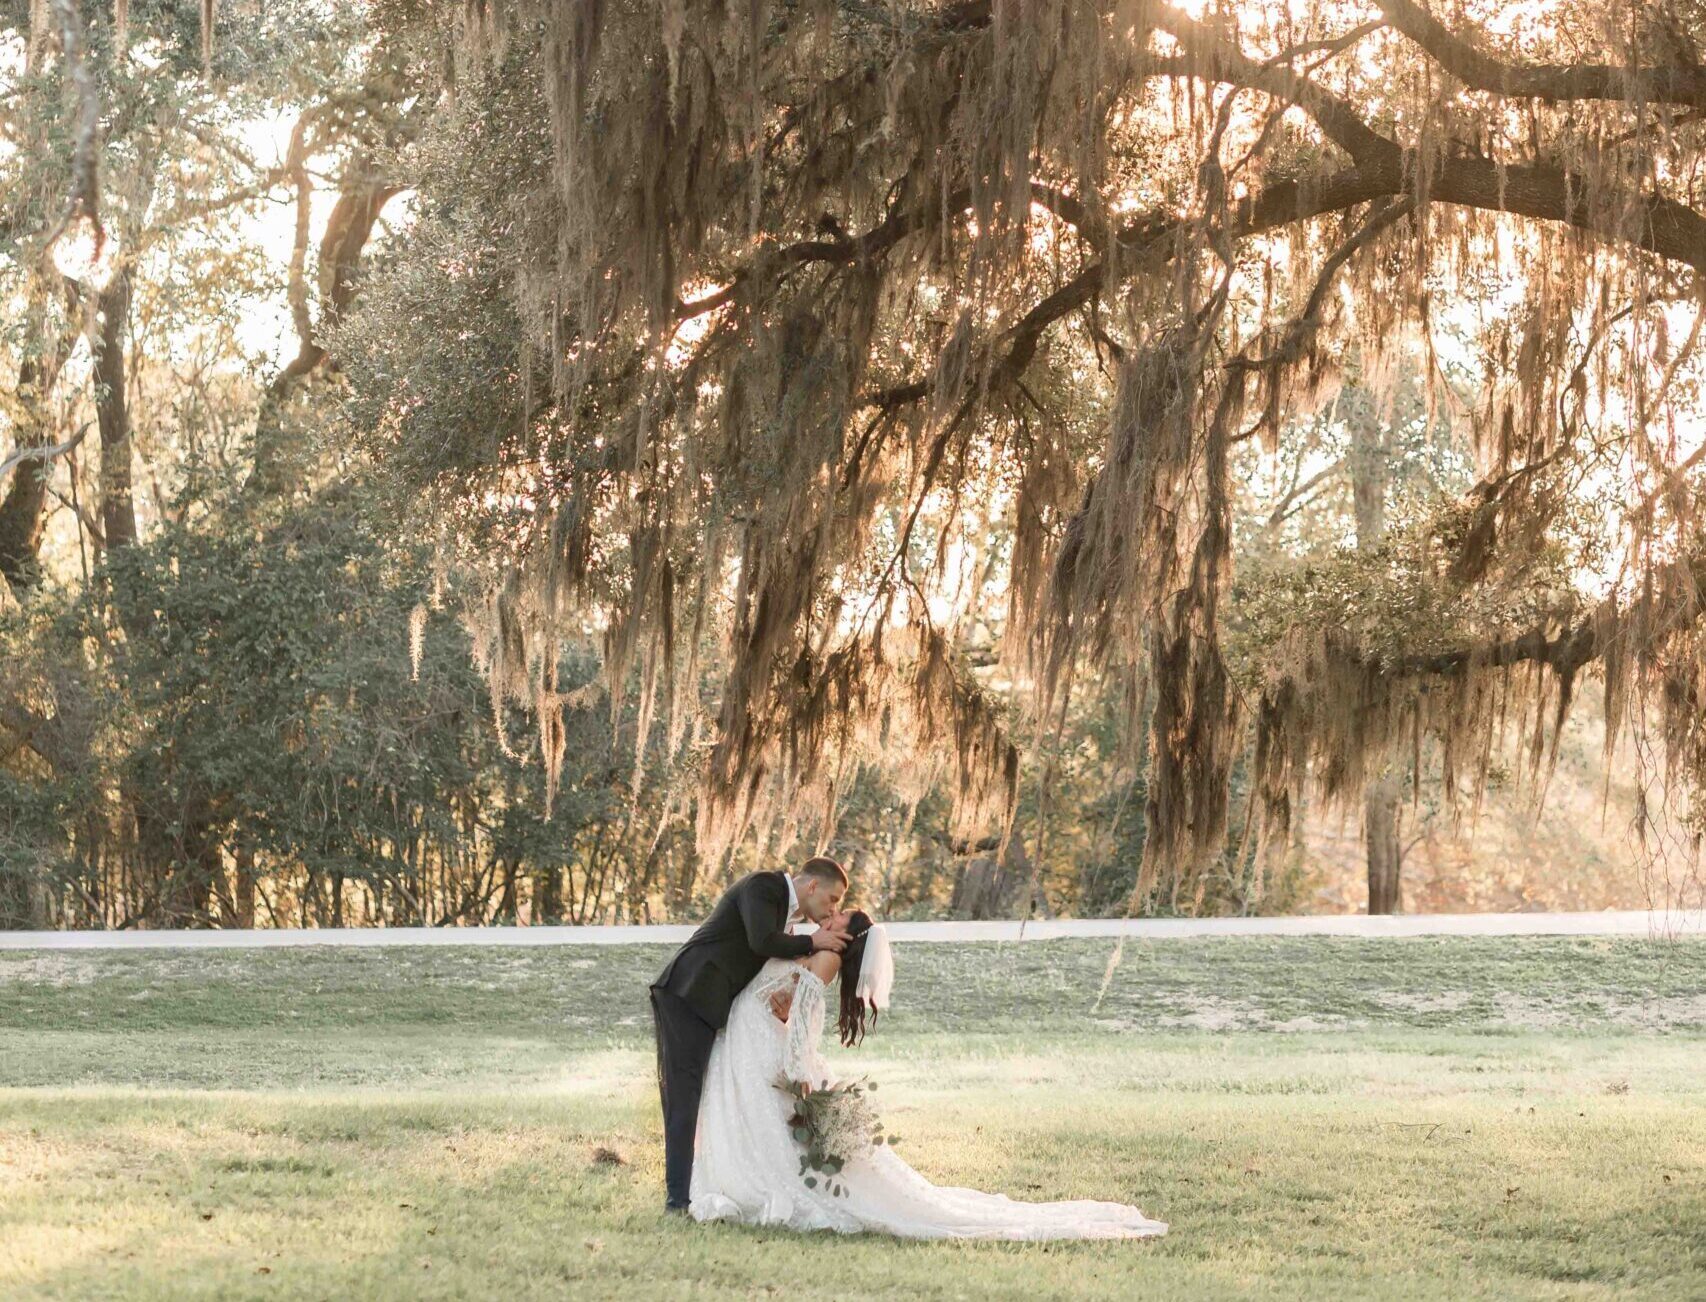 Micro wedding in Houston at Brazos Bend State Park, taken by Ally's Photography